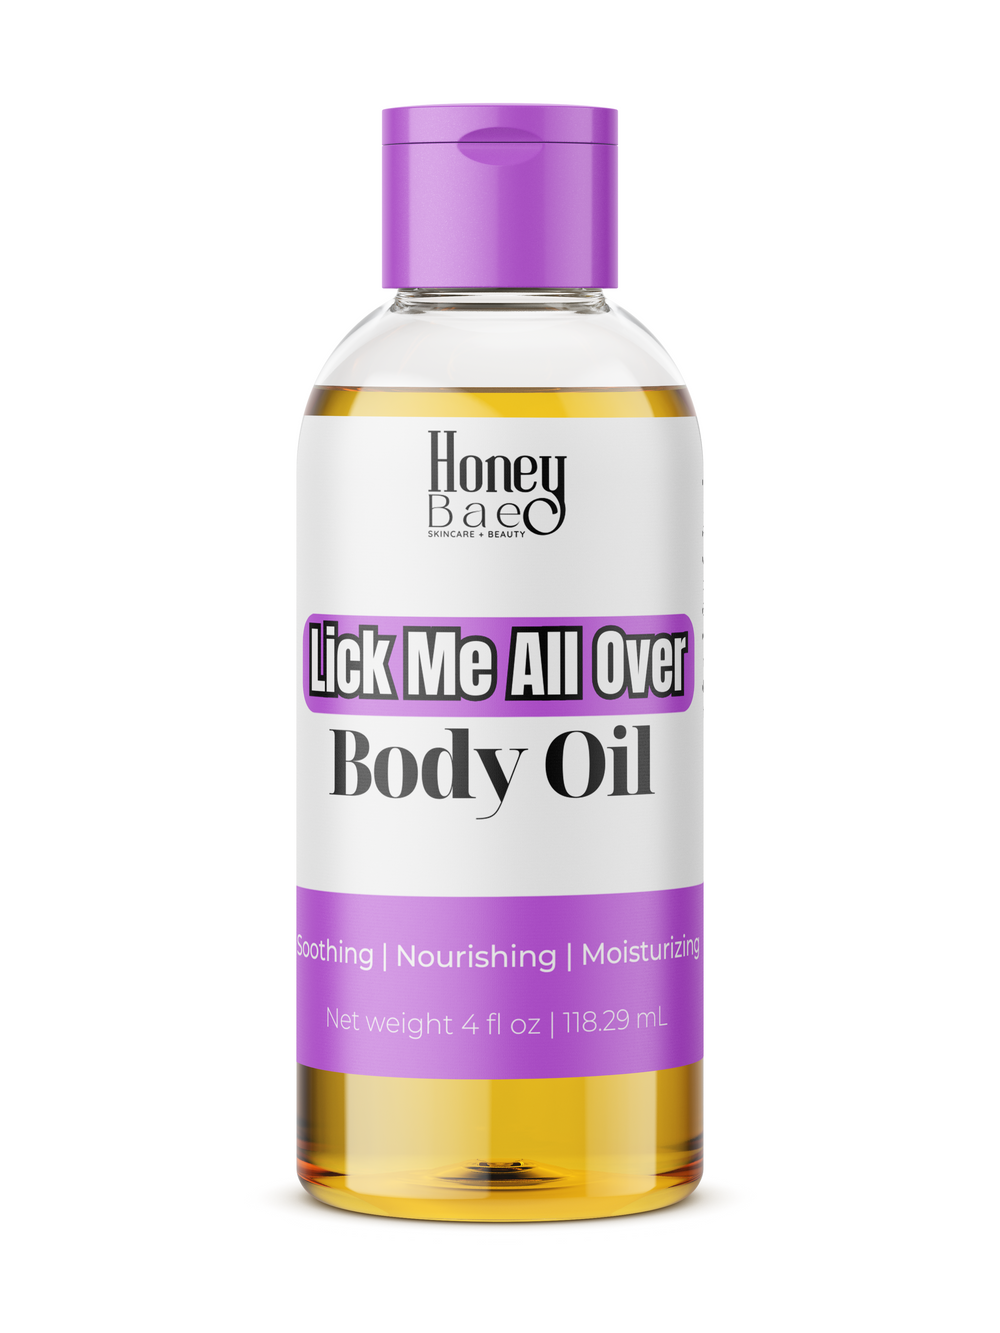 Lick Me All Over - Body Oil